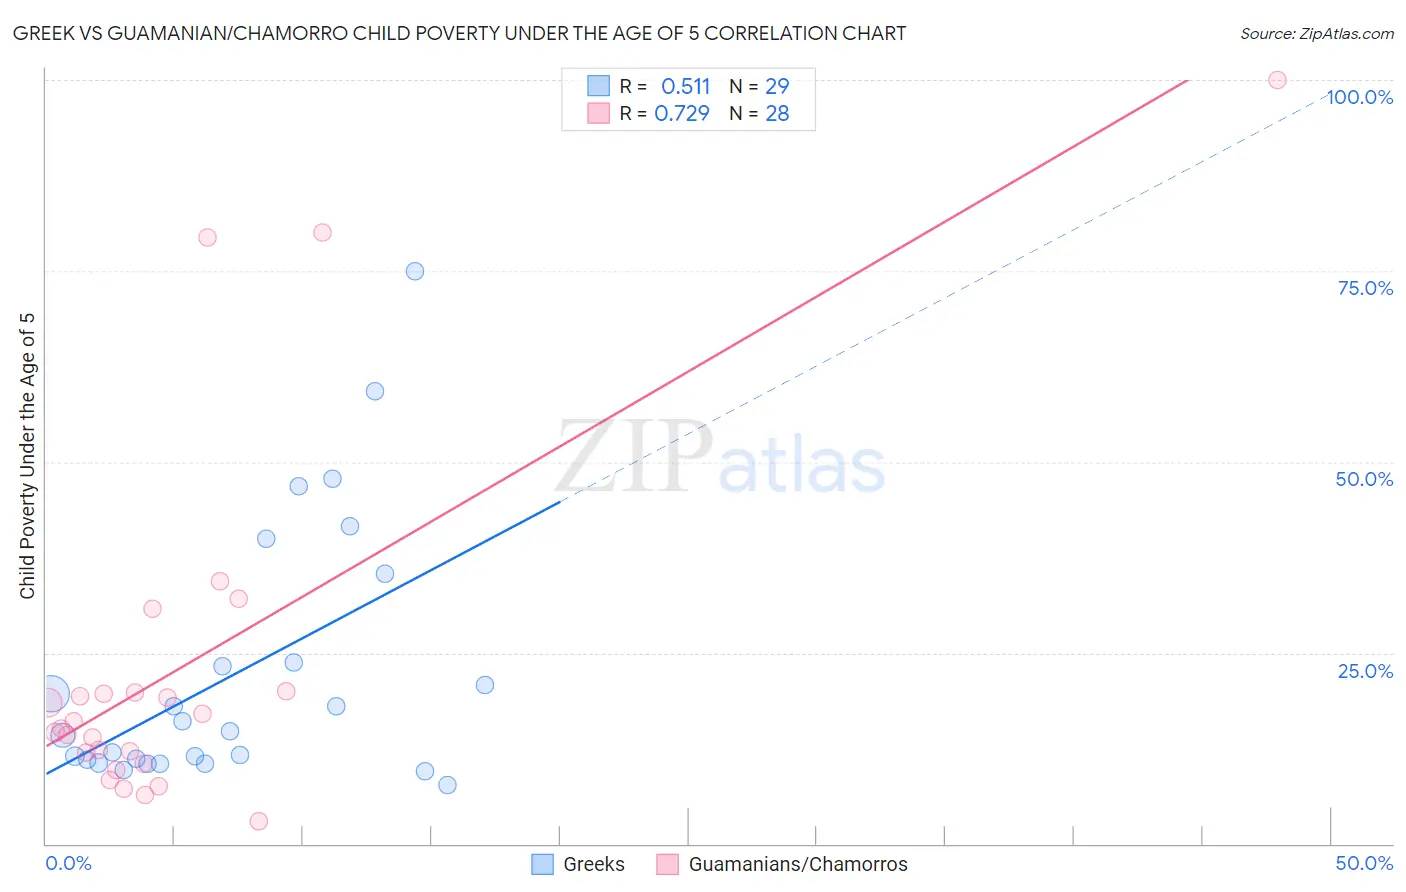 Greek vs Guamanian/Chamorro Child Poverty Under the Age of 5